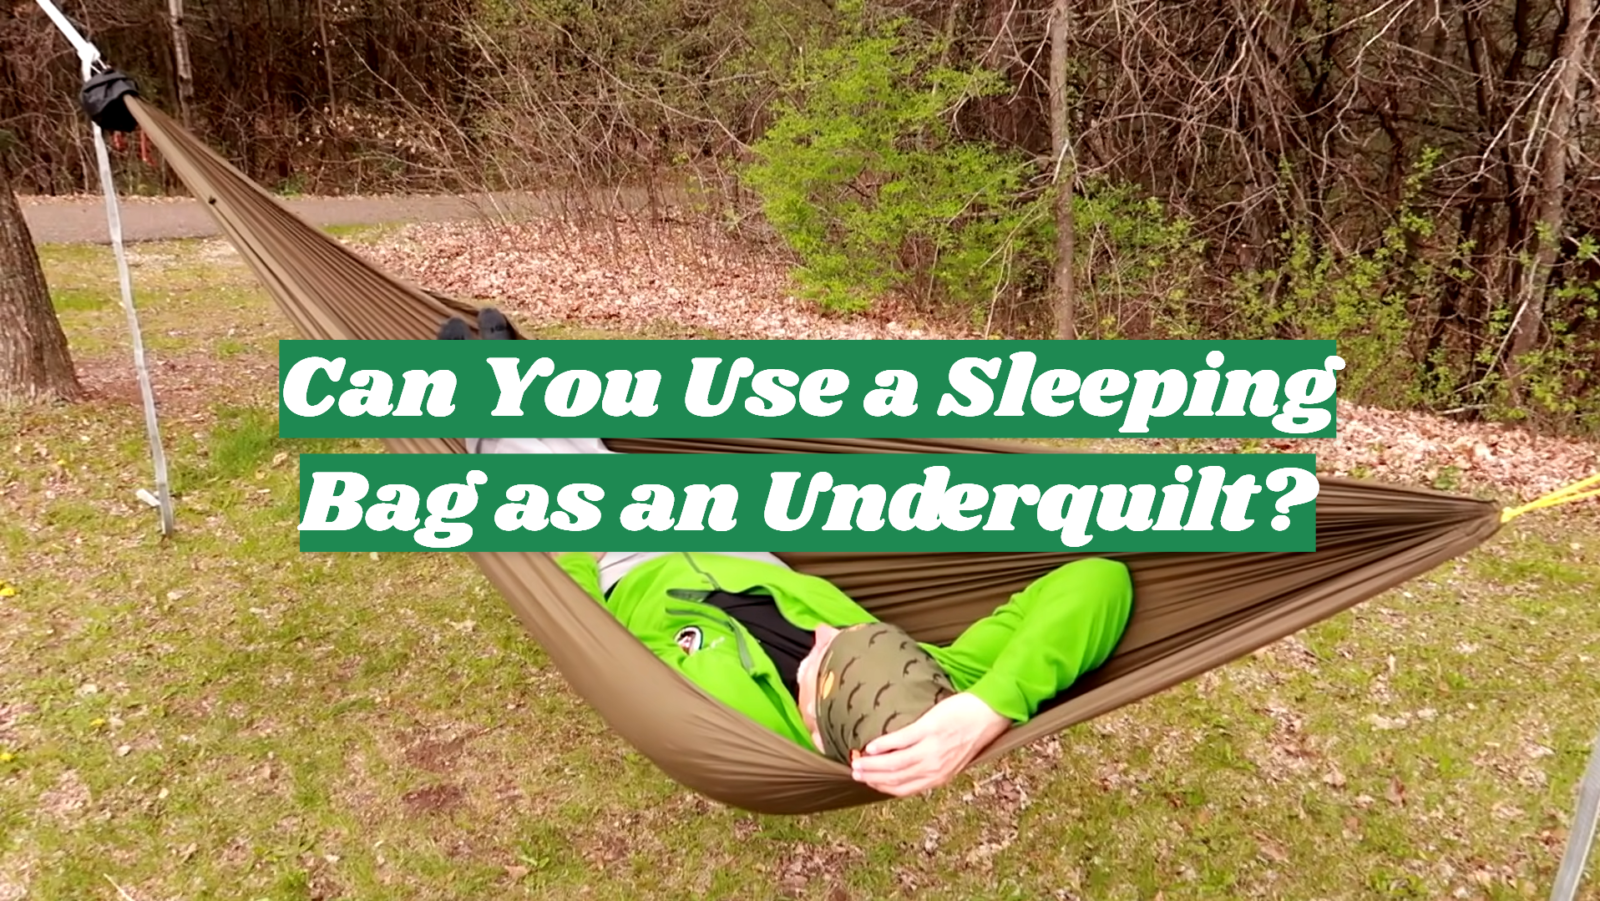 Can You Use a Sleeping Bag as an Underquilt?